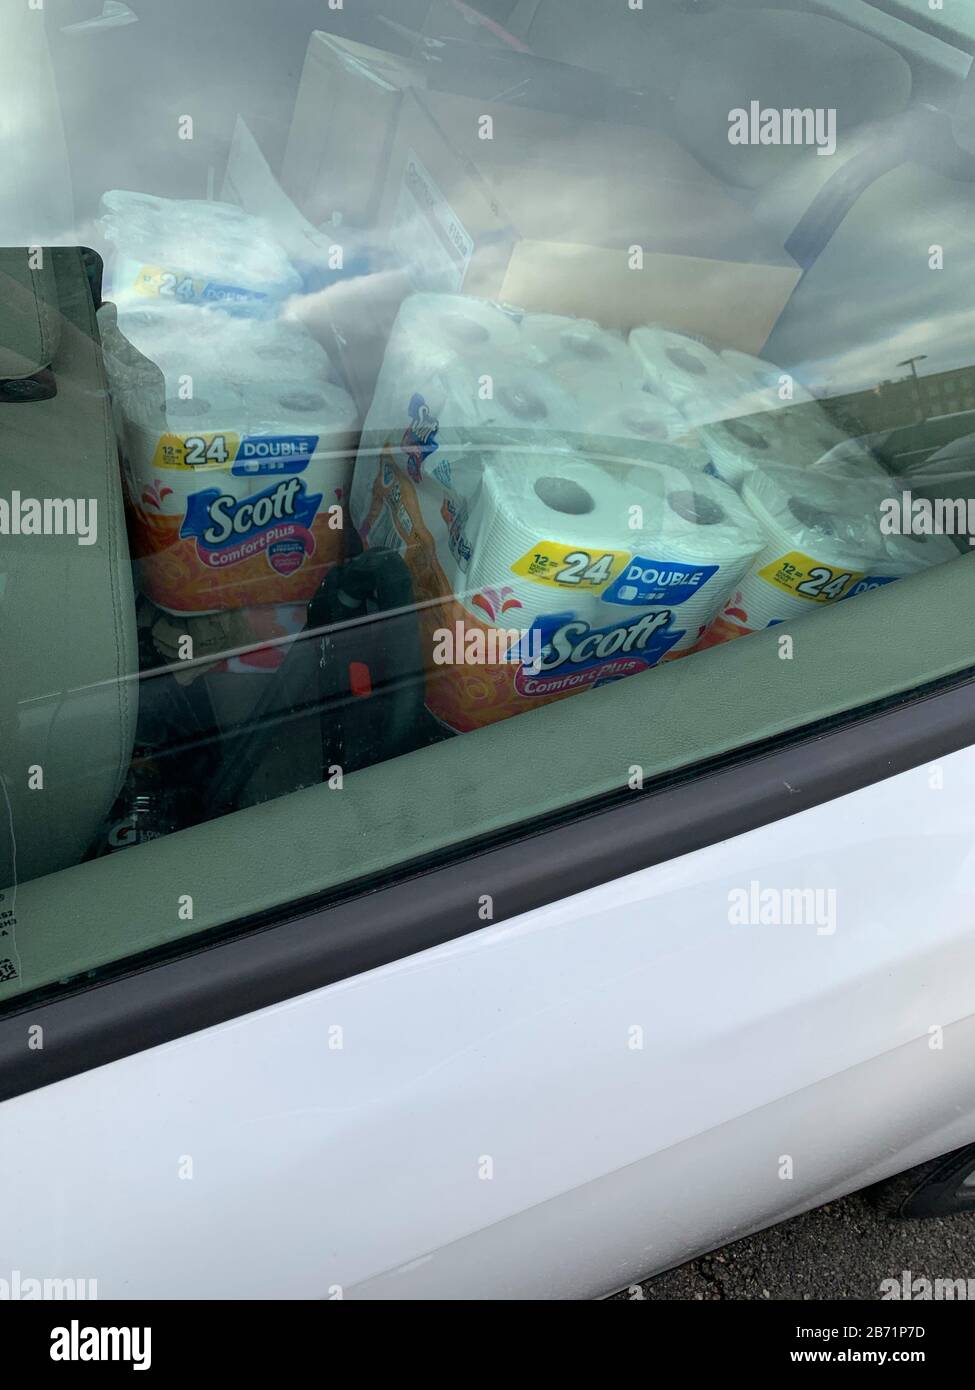 Dayton, OH- Mar 11, 2020: Back seat of car following fear buying of toilet paper due to corona virus scare. Ohio declaration of emergency. Stock Photo